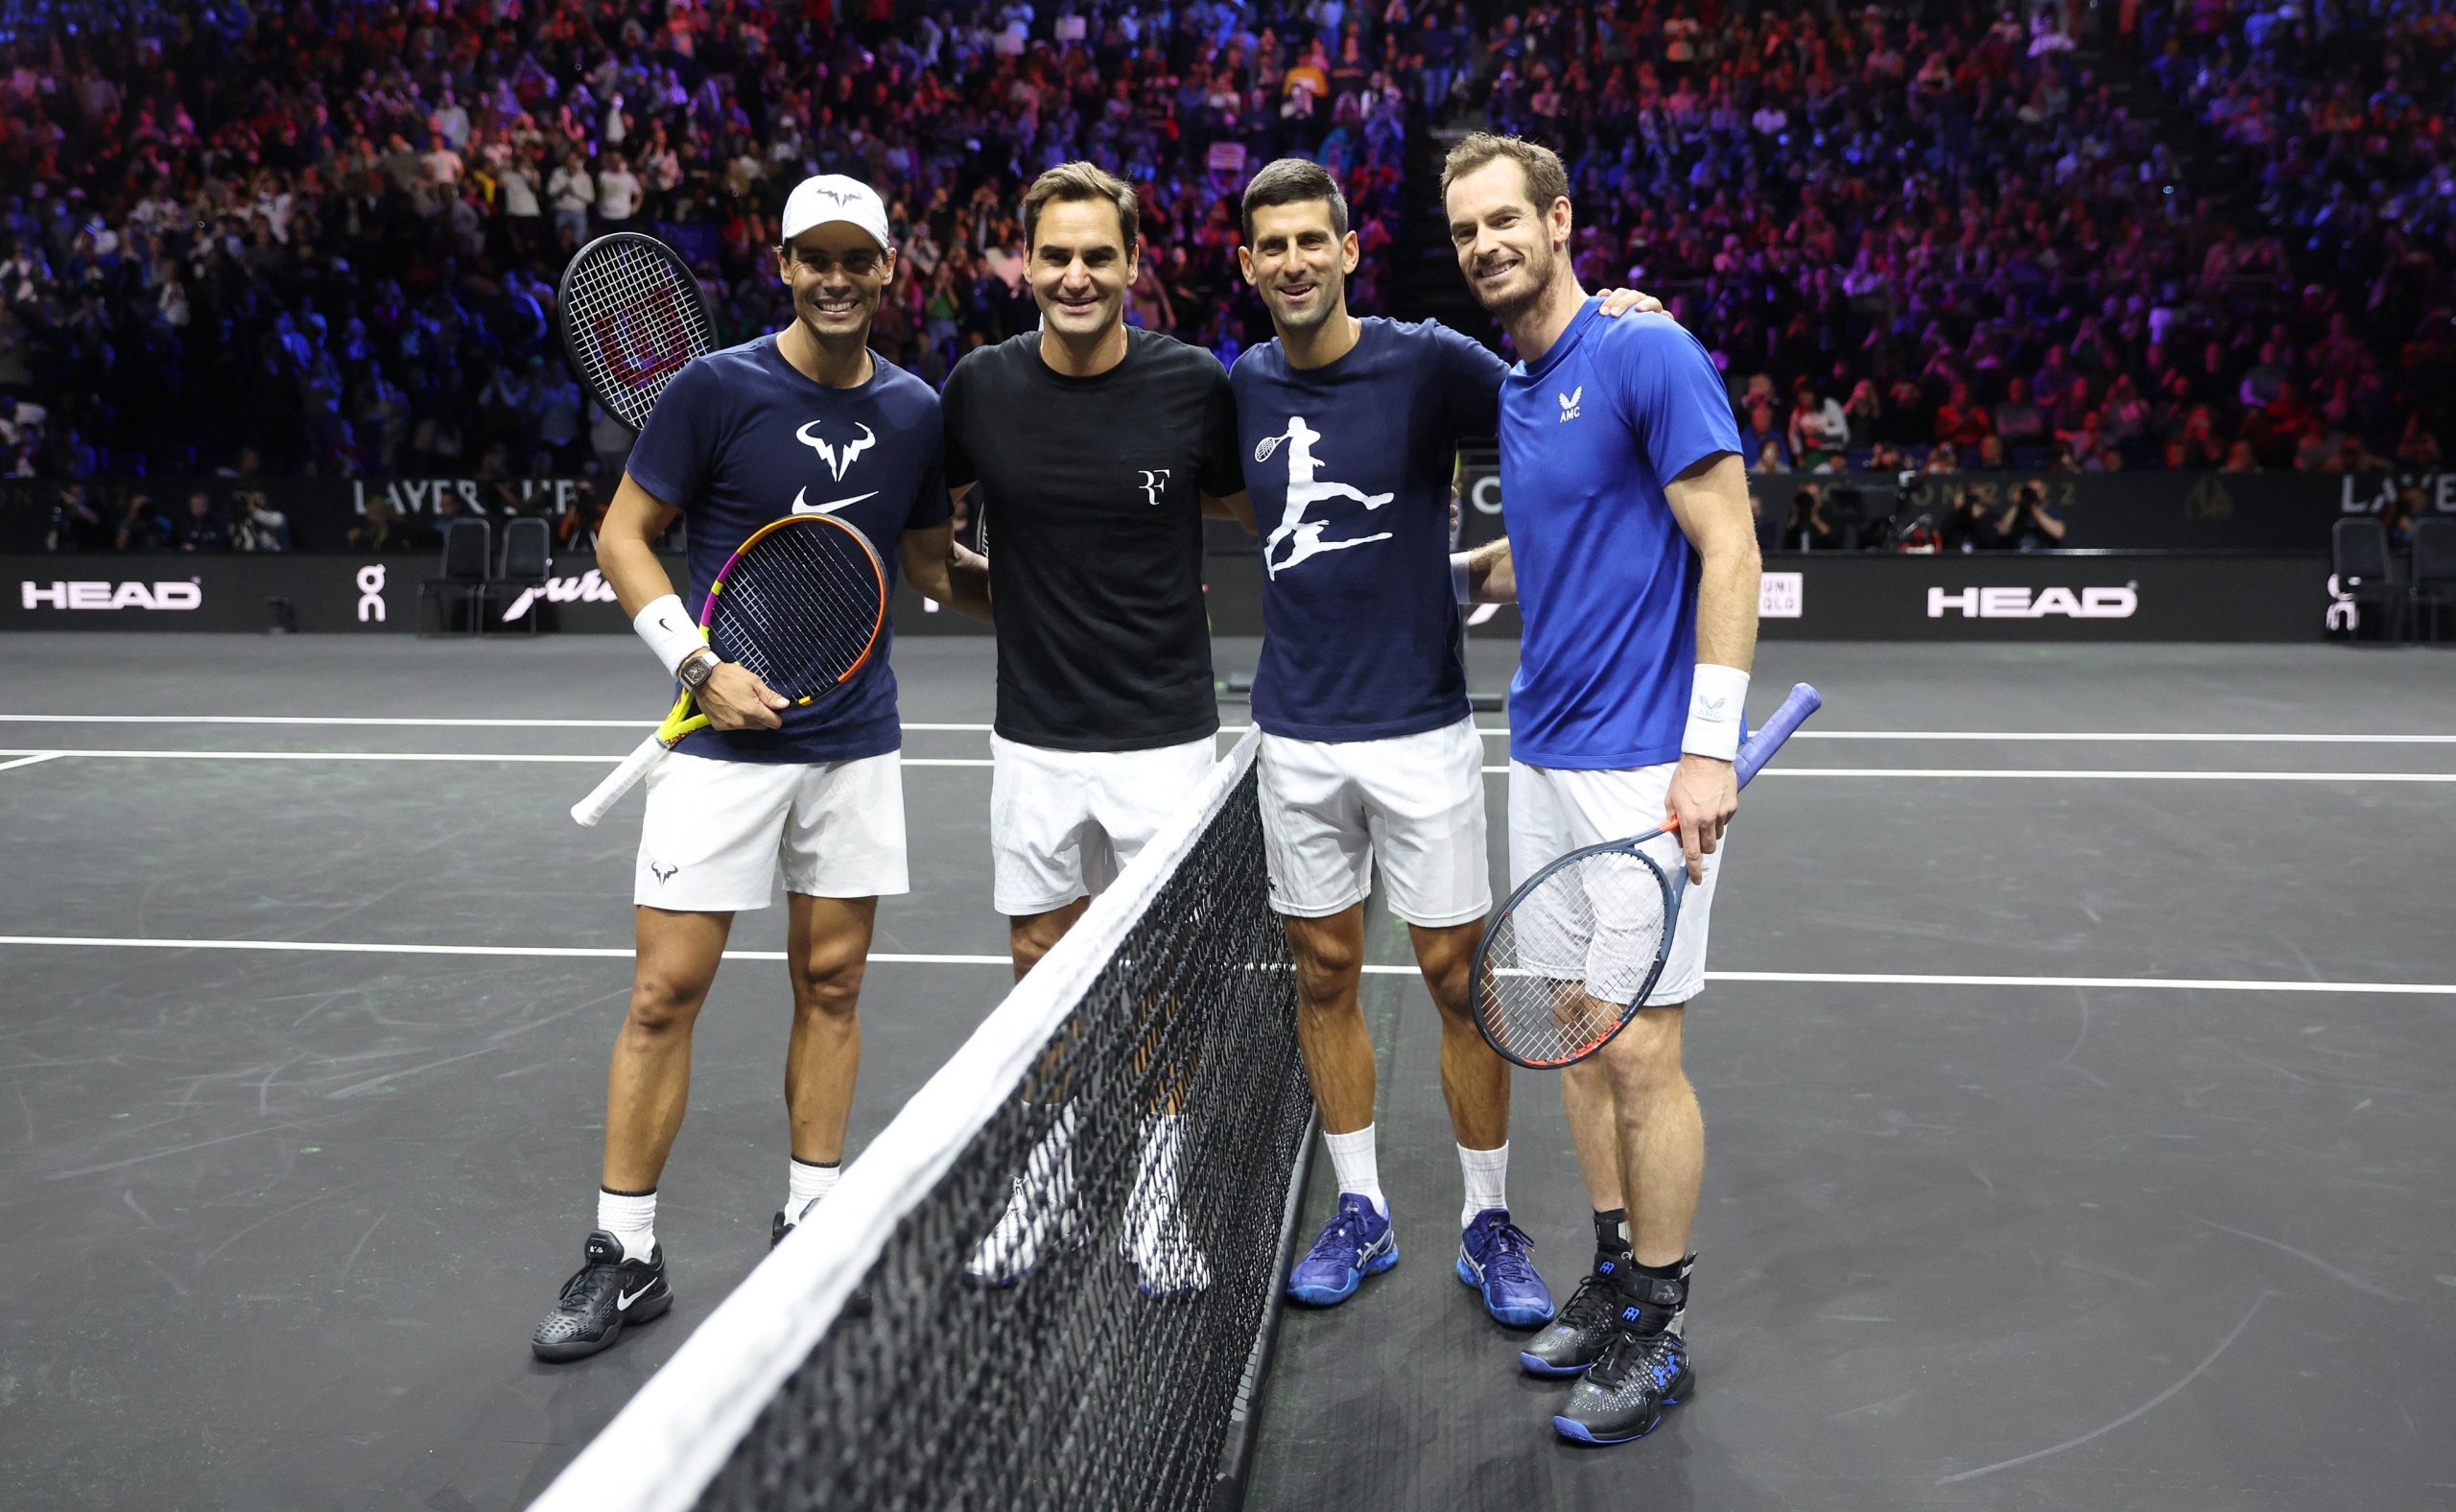 Laver Cup 2022: Teams, schedule, and fixtures